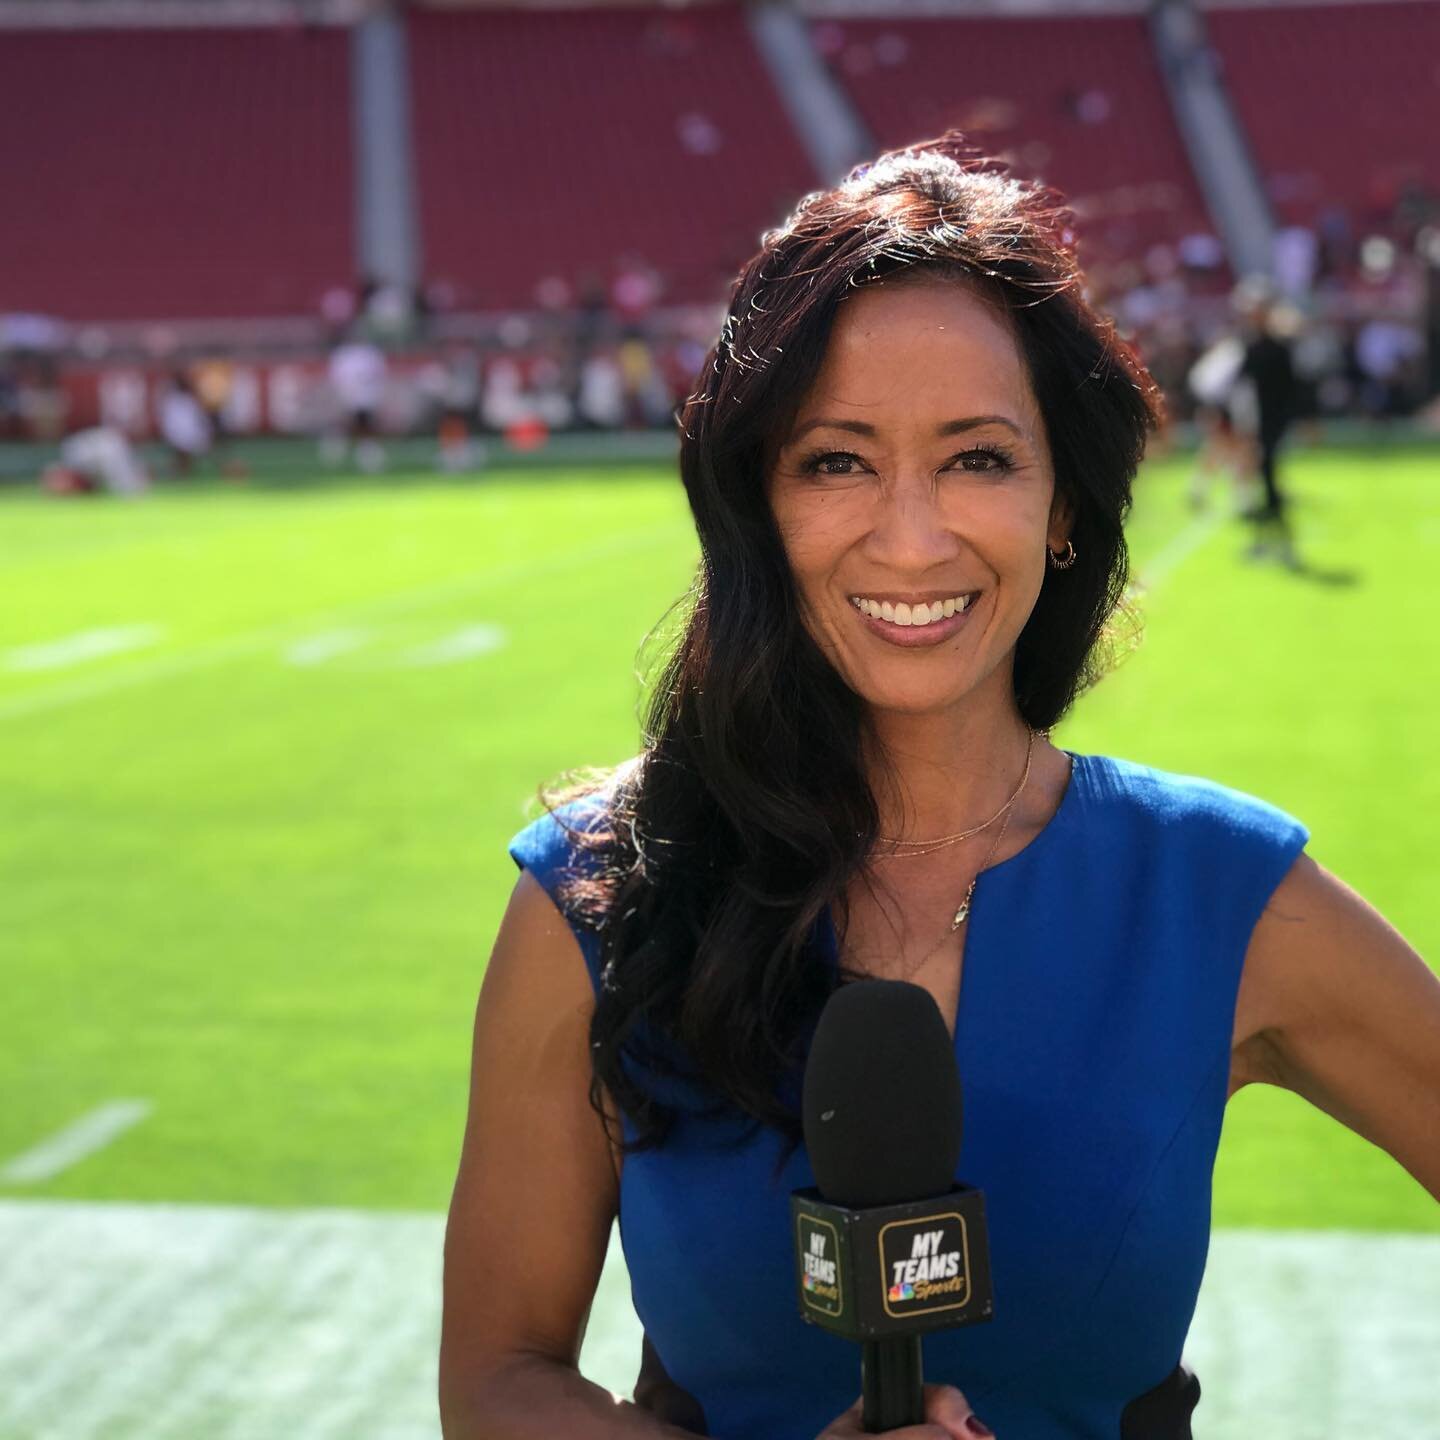 Our #49ers coverage starts early tomorrow morning at 9am PT! Who is ready for some football? Follow @nbcsauthentic for all of the details heading into Week 1 #AZvsSFas the 49ers try to avenge their 2019 season. 
What are your 2020 predictions?
📸: @j